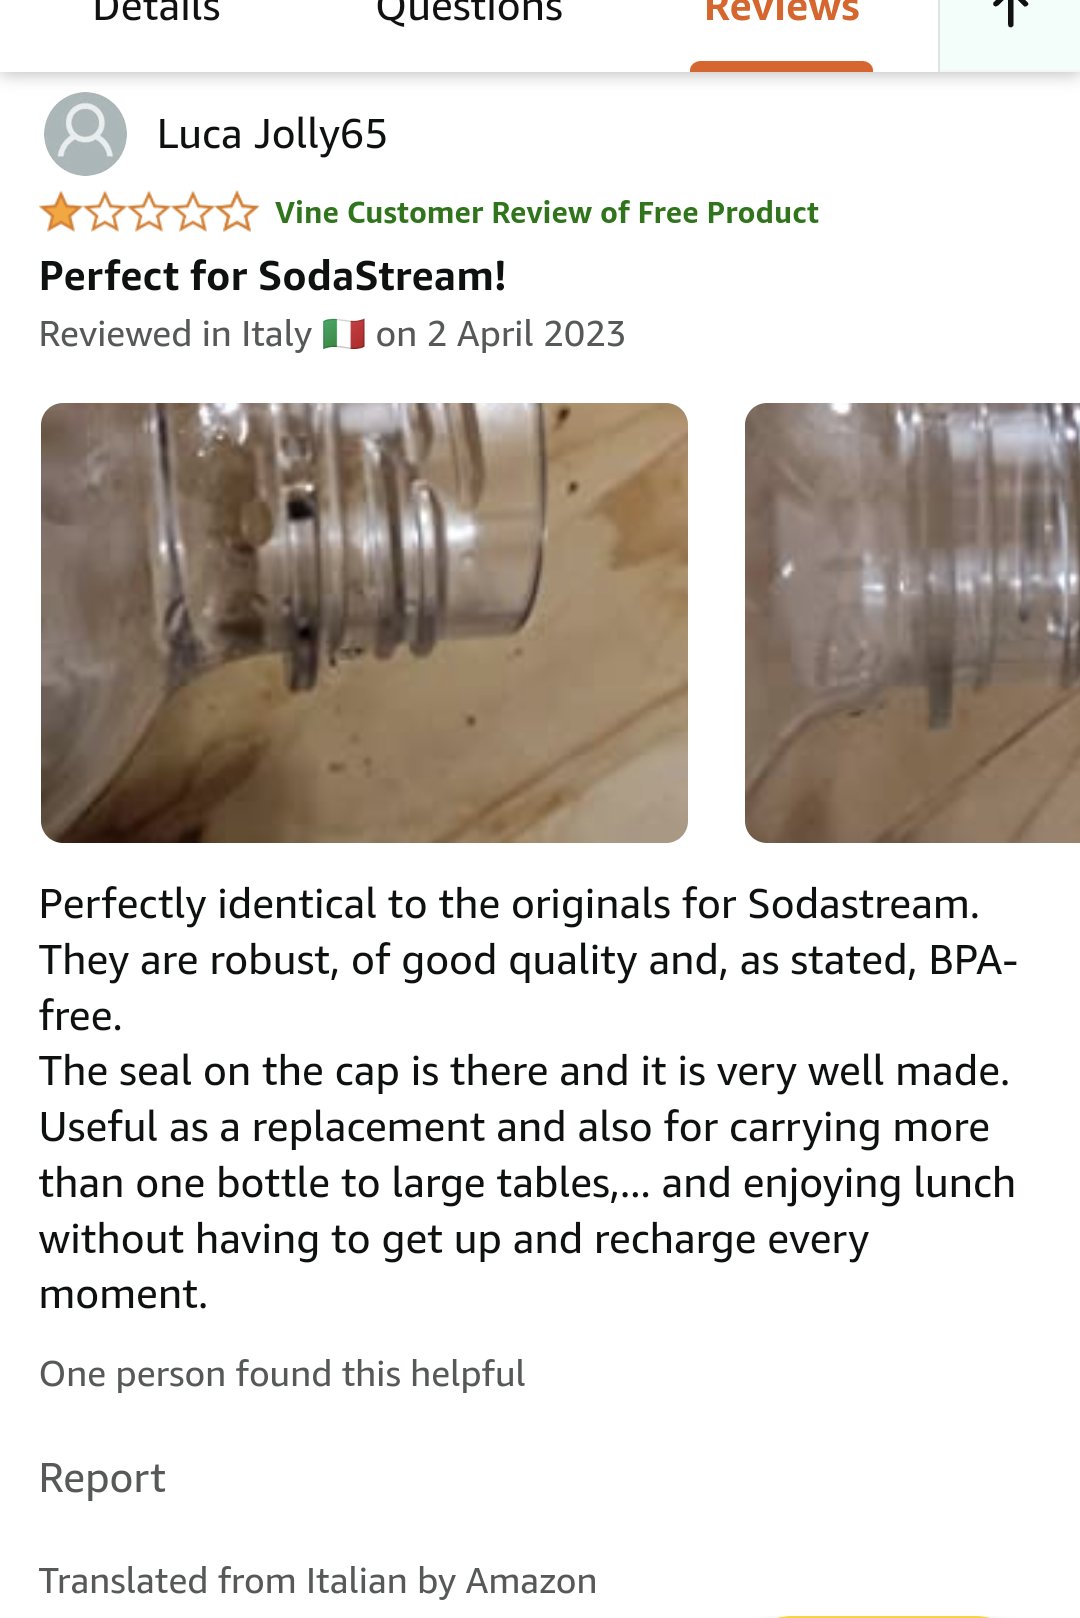 Martha Lauren on Twitter: "Interestingly, on Amazon some scathing Italian  reviews on a generic bottle for sodastreams become glowing reviews when  translated to English idk if sellers can put forward 'corrections' of